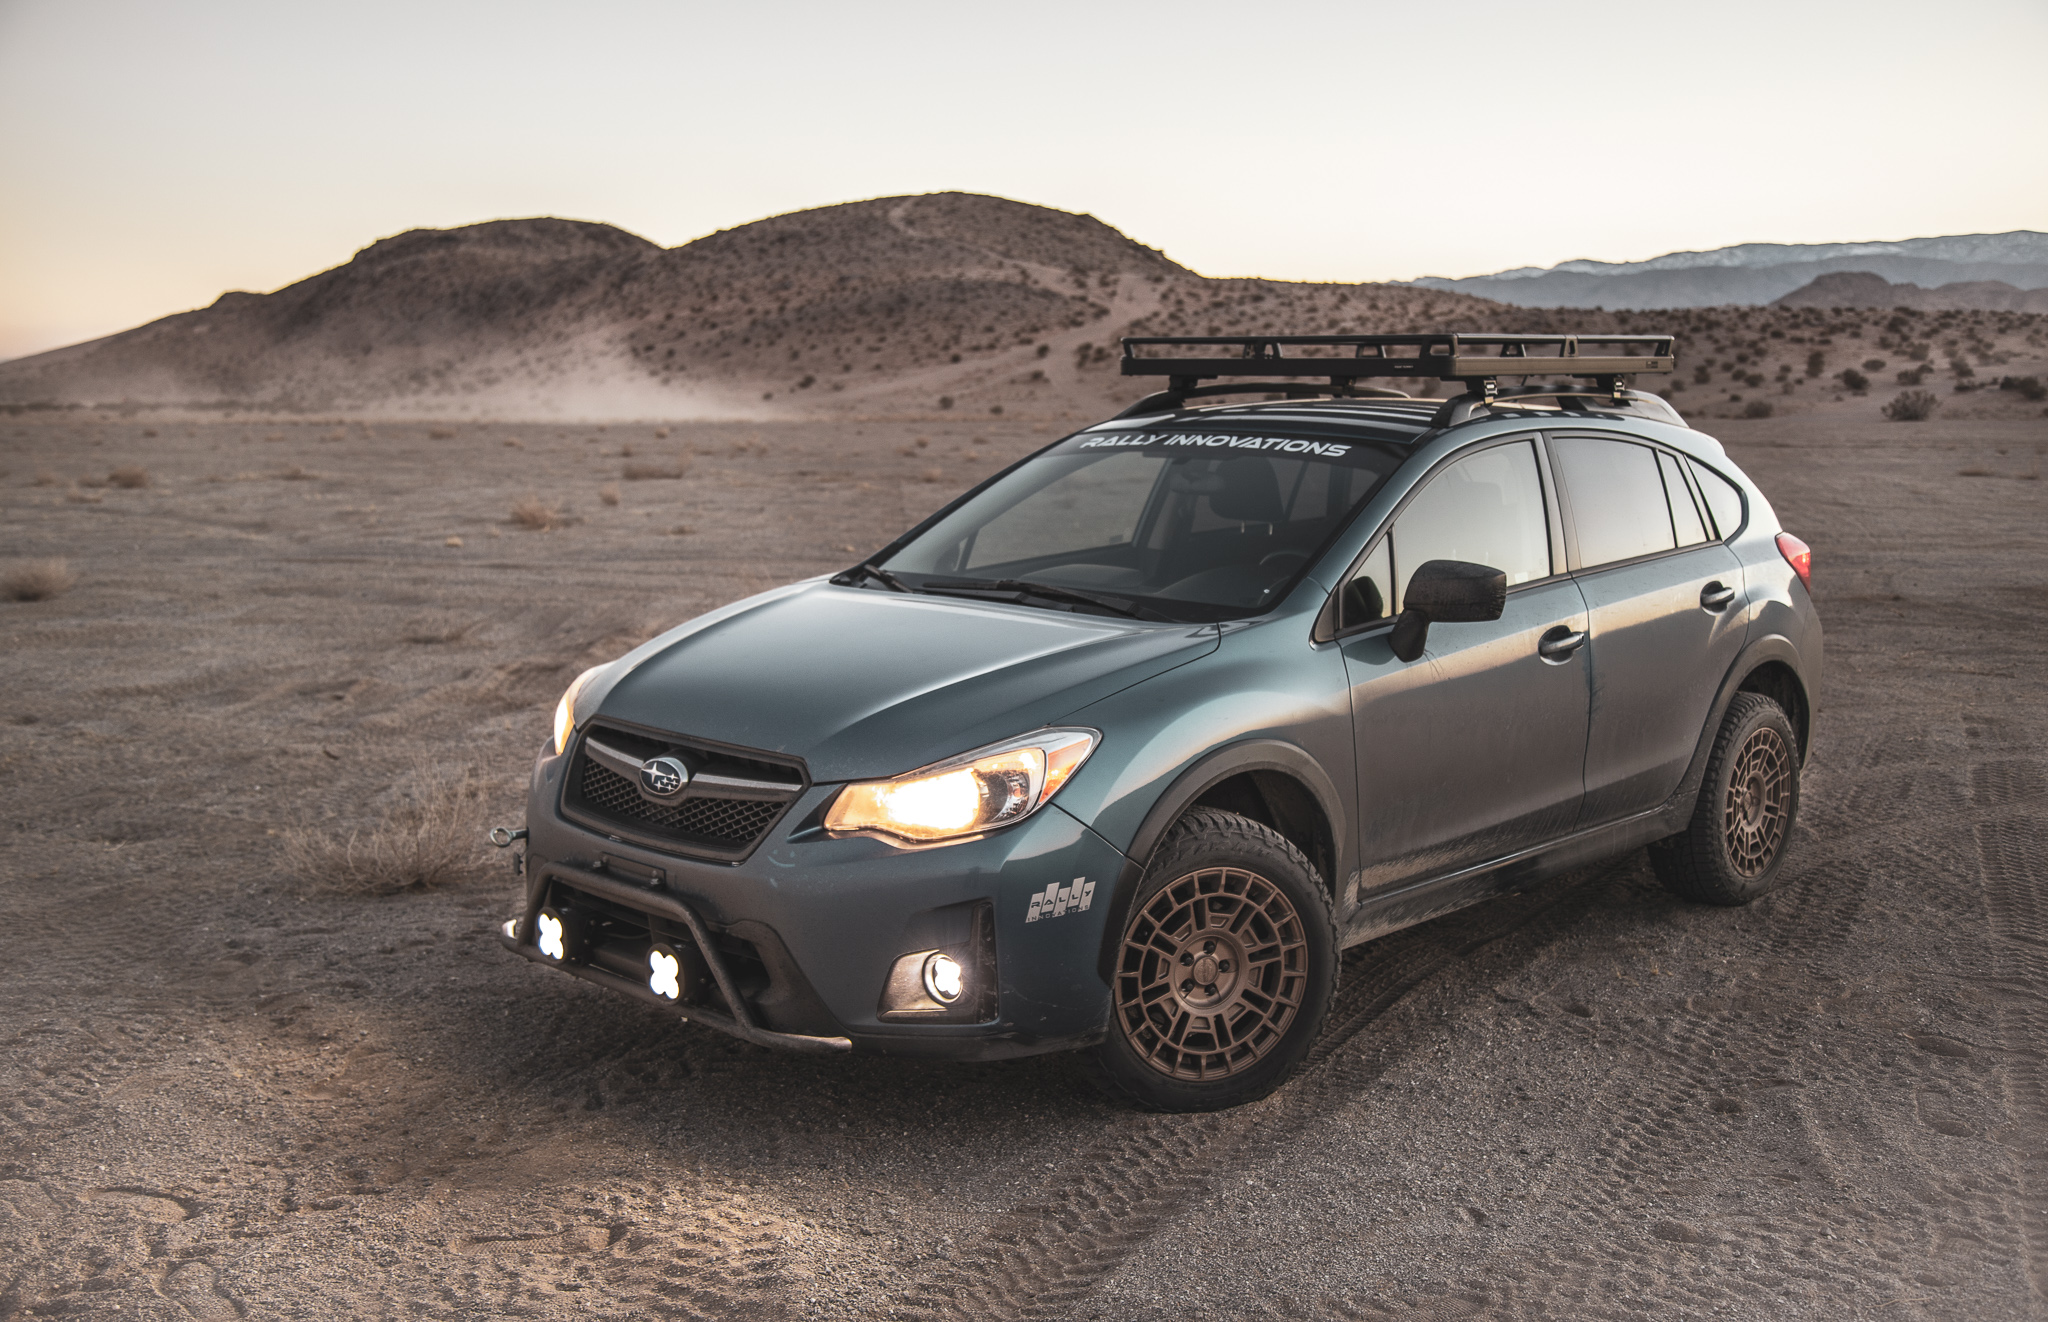 Subaru forester with wild peak all terrain tyres on sand